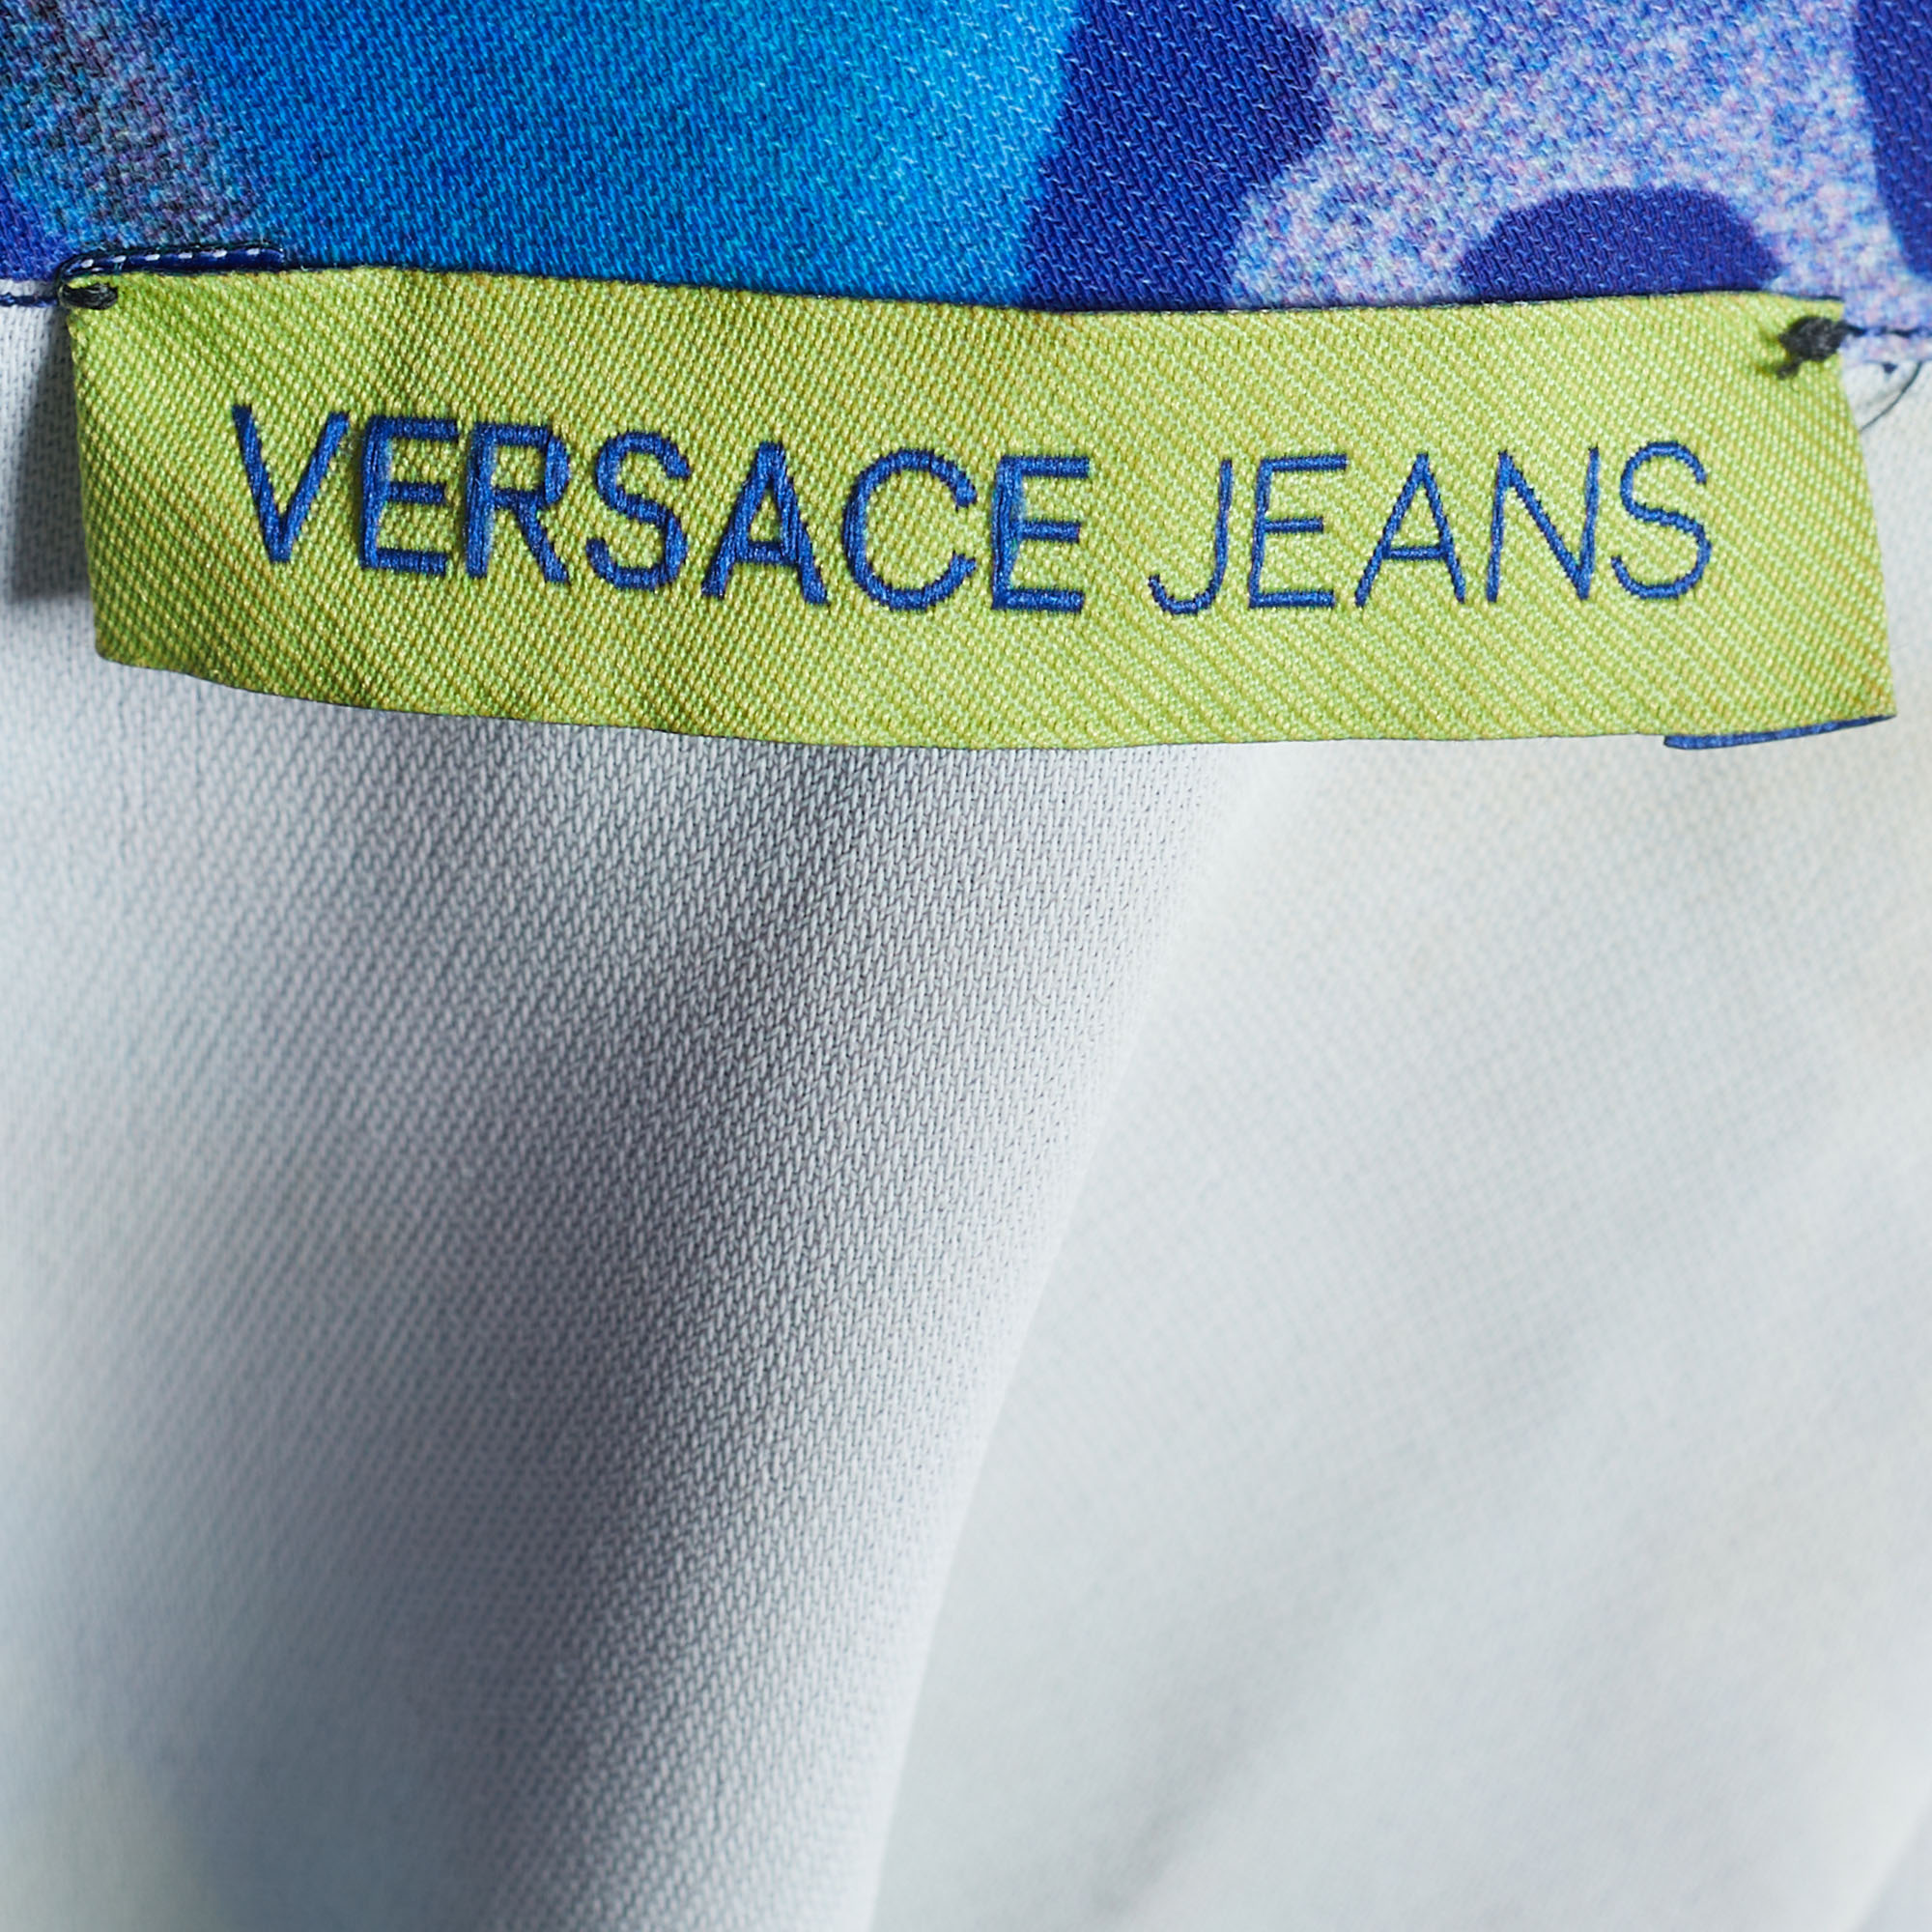 Versace Jeans Multicolor Printed Sateen Button Back Top S